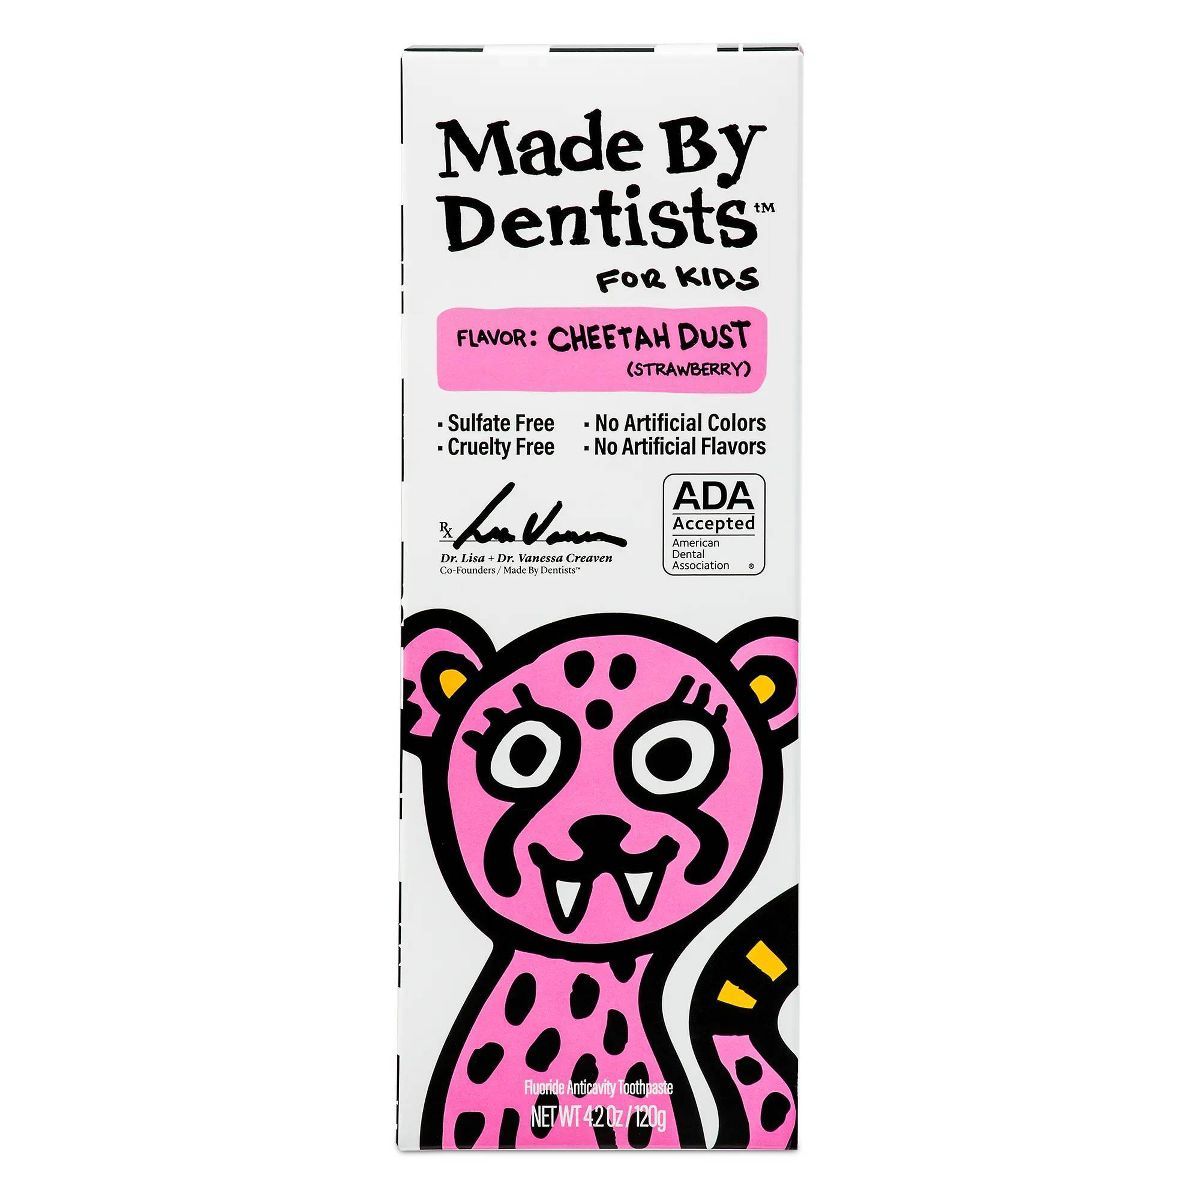 Made By Dentists Kids Cheetah Fluoride Anticavity Toothpaste -Strawberry - 4.2 oz | Target